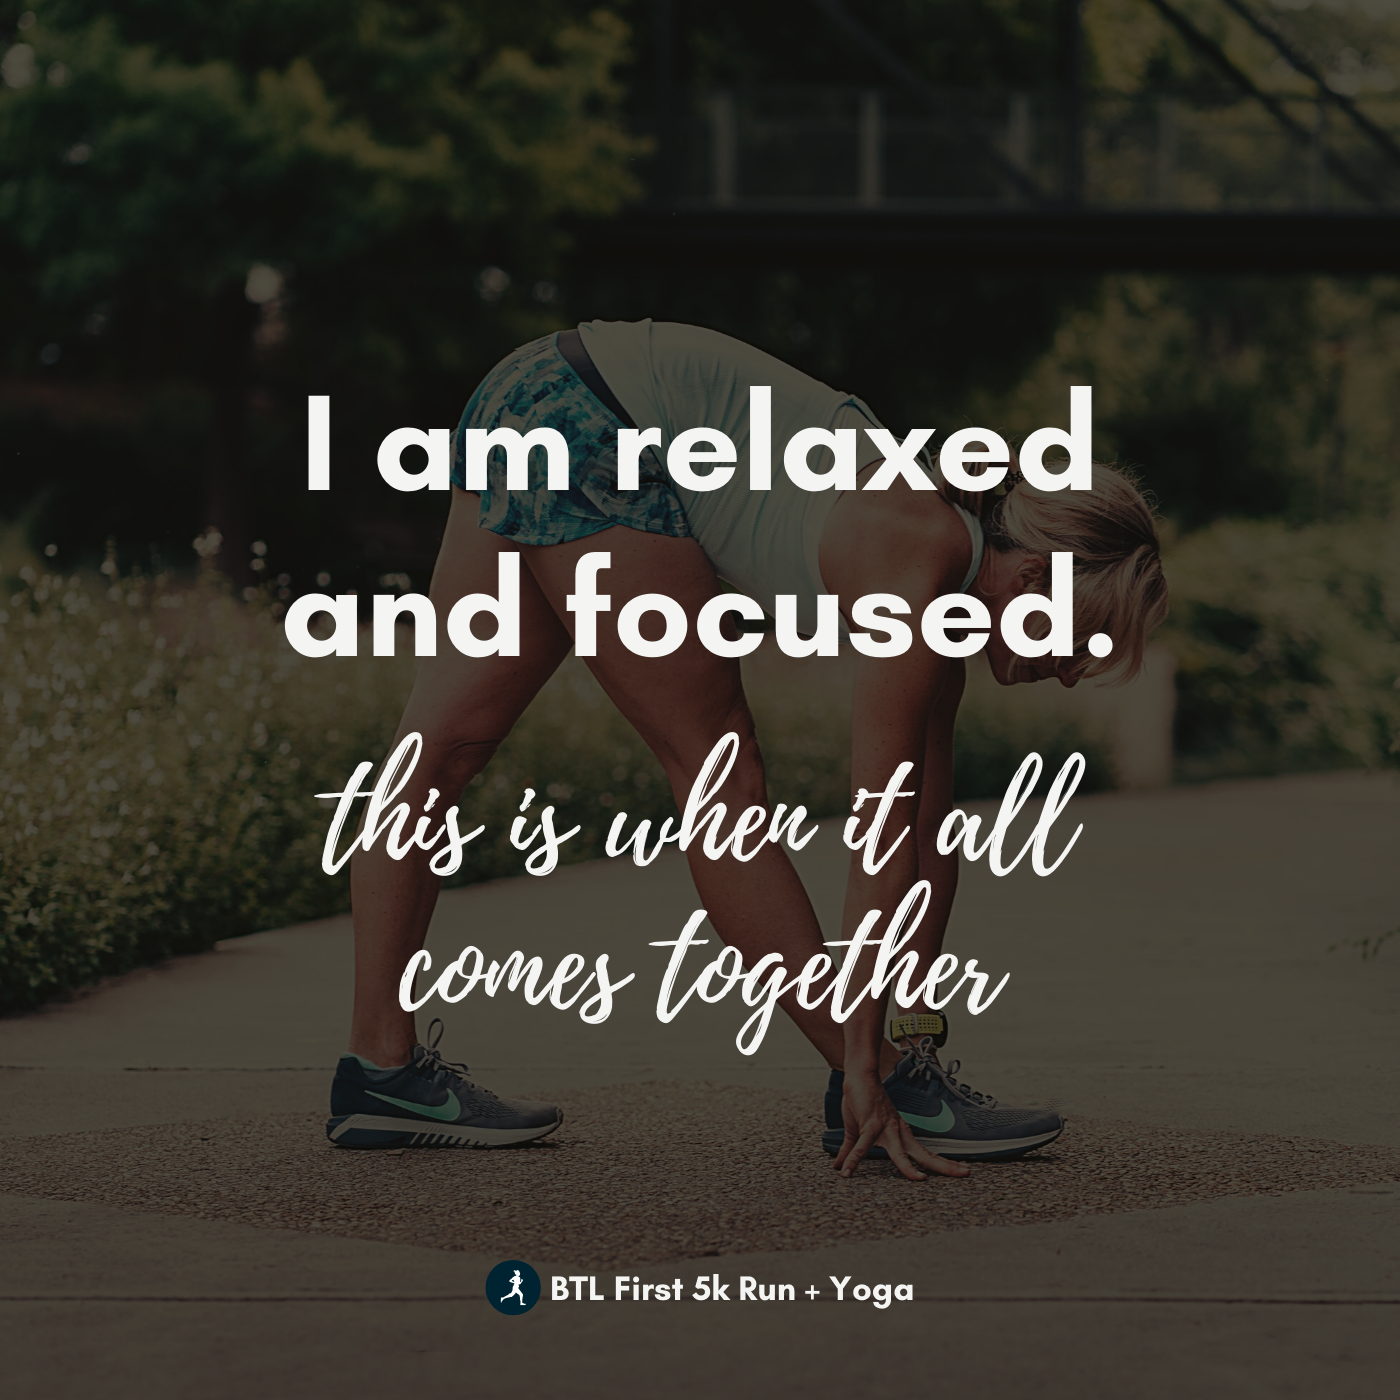 Your first 5k run and yoga program: Week 12 instagram shareable image